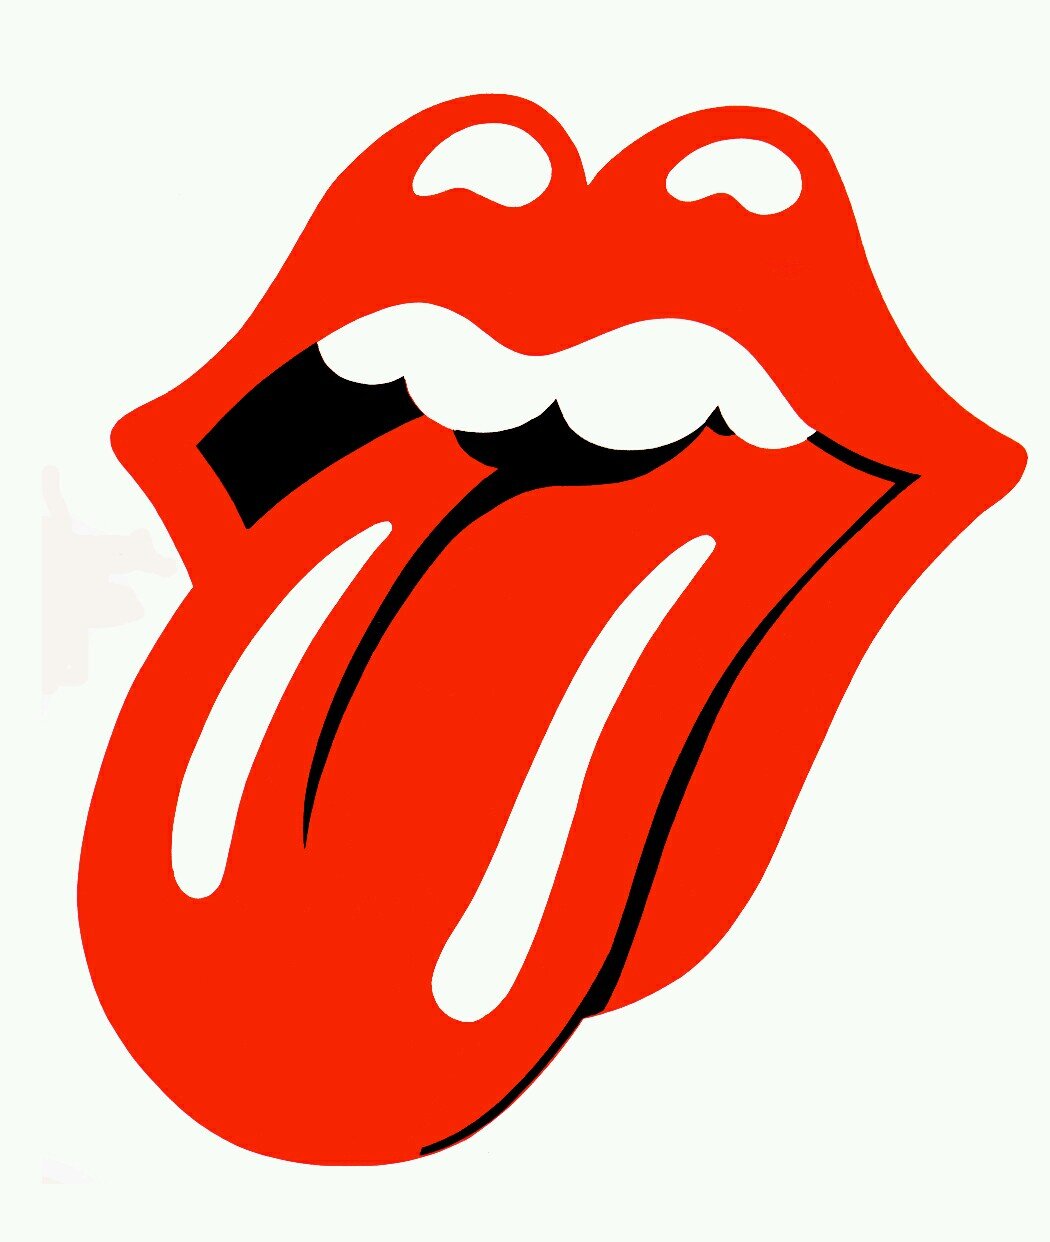 I'm the Rolling Stones' biggest fan!! One of my dreams is to see them at a concert♡ I can't explain what do I feel when I listen their songs.